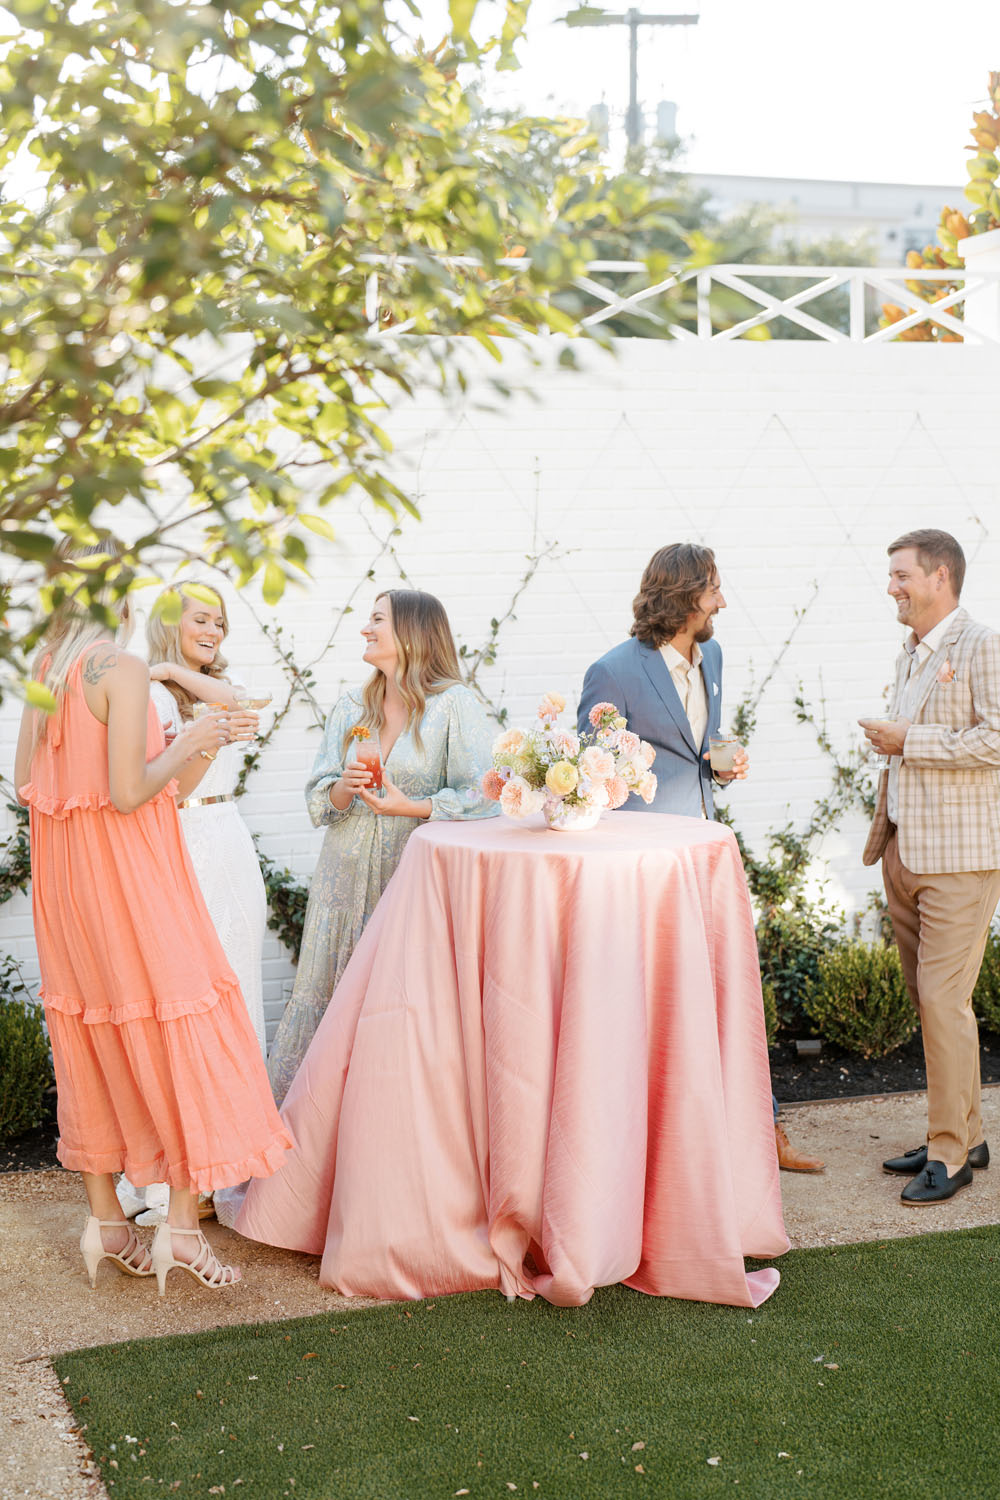 A sweet gingham and pastel courtyard wedding